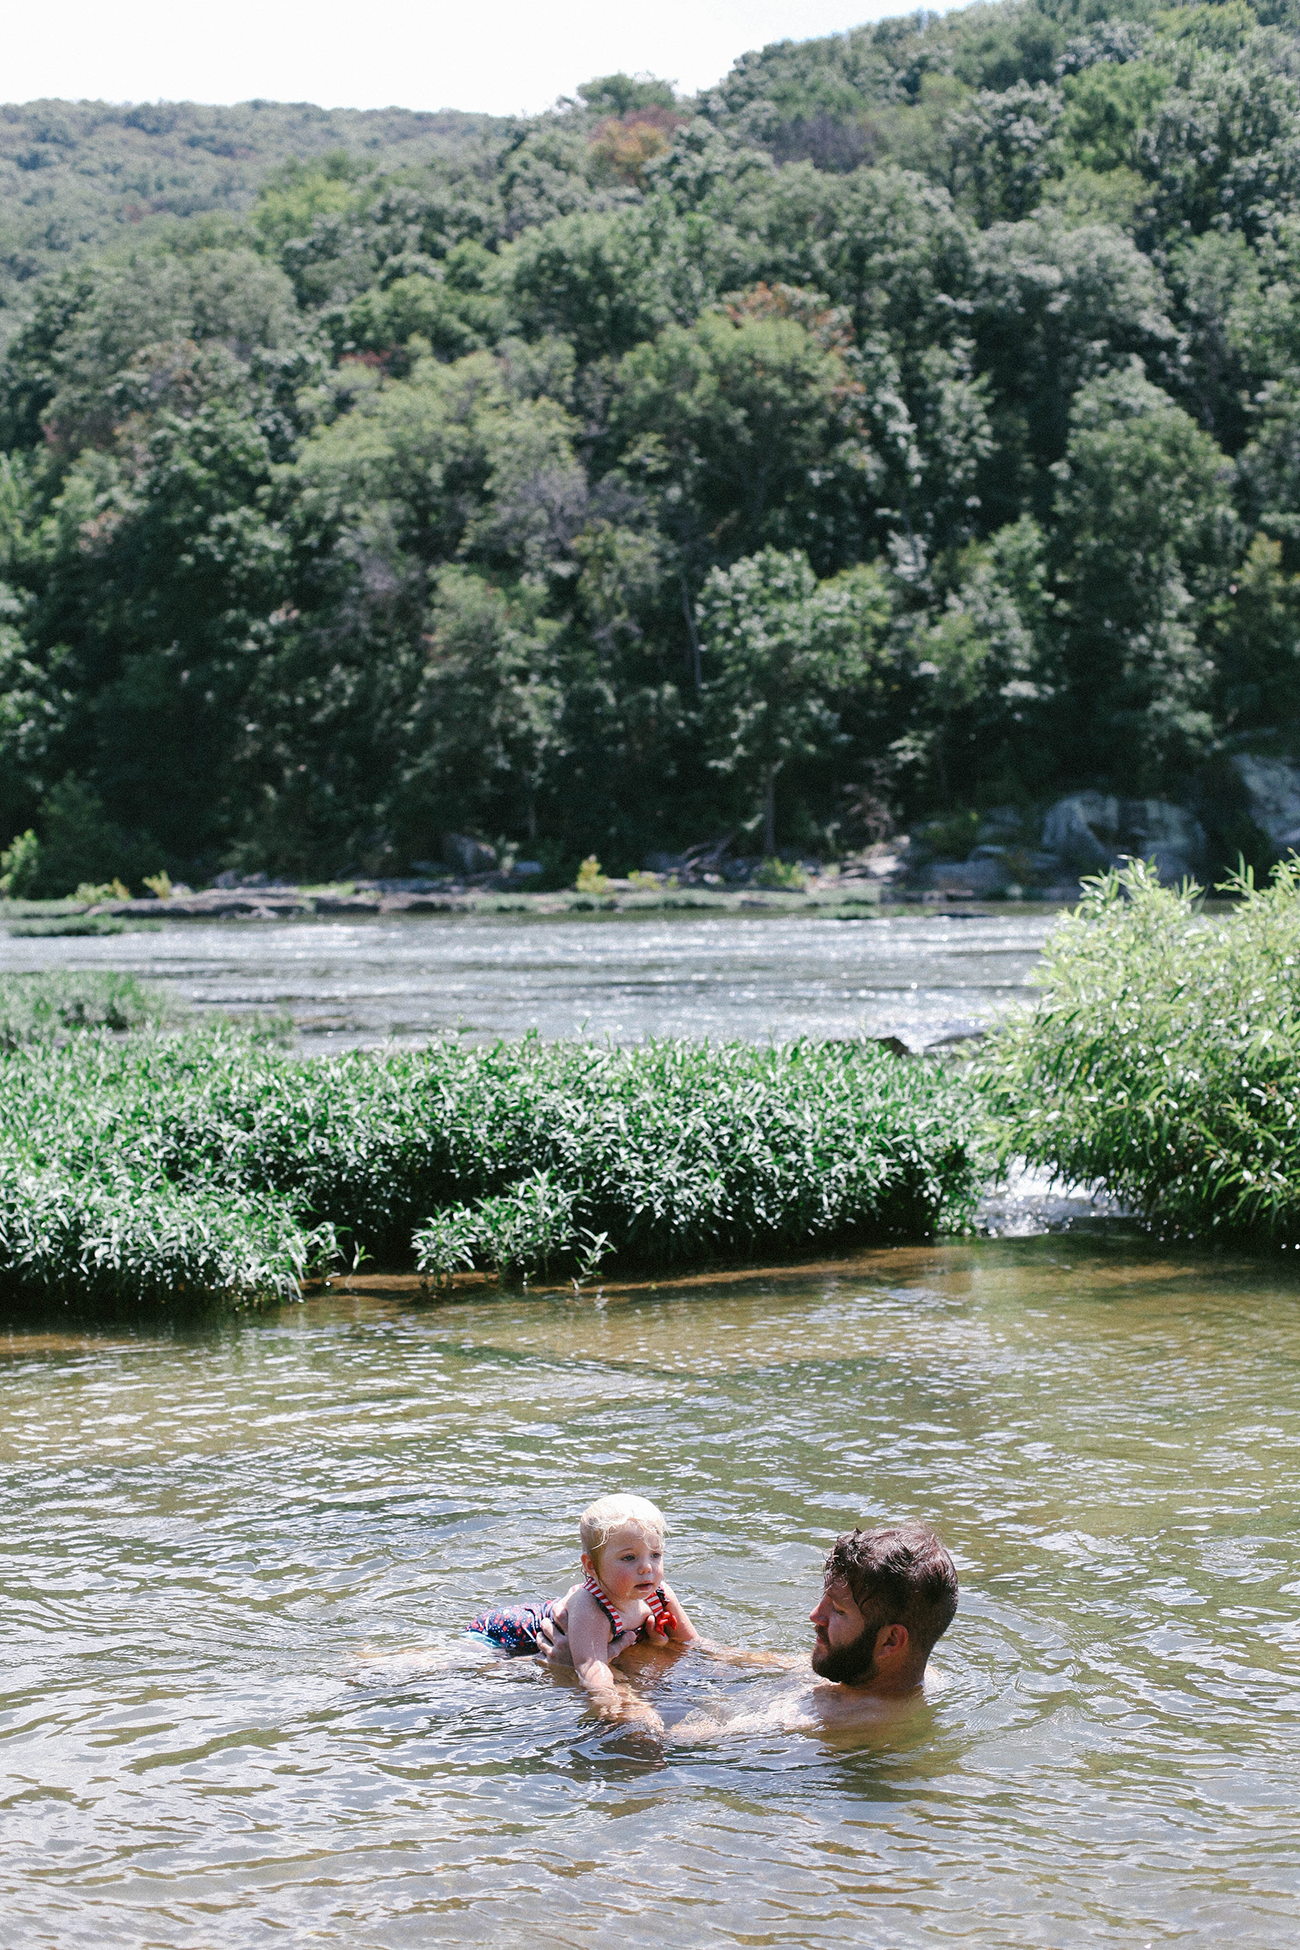 A Daily Something | Savoring Summer at Harpers Ferry